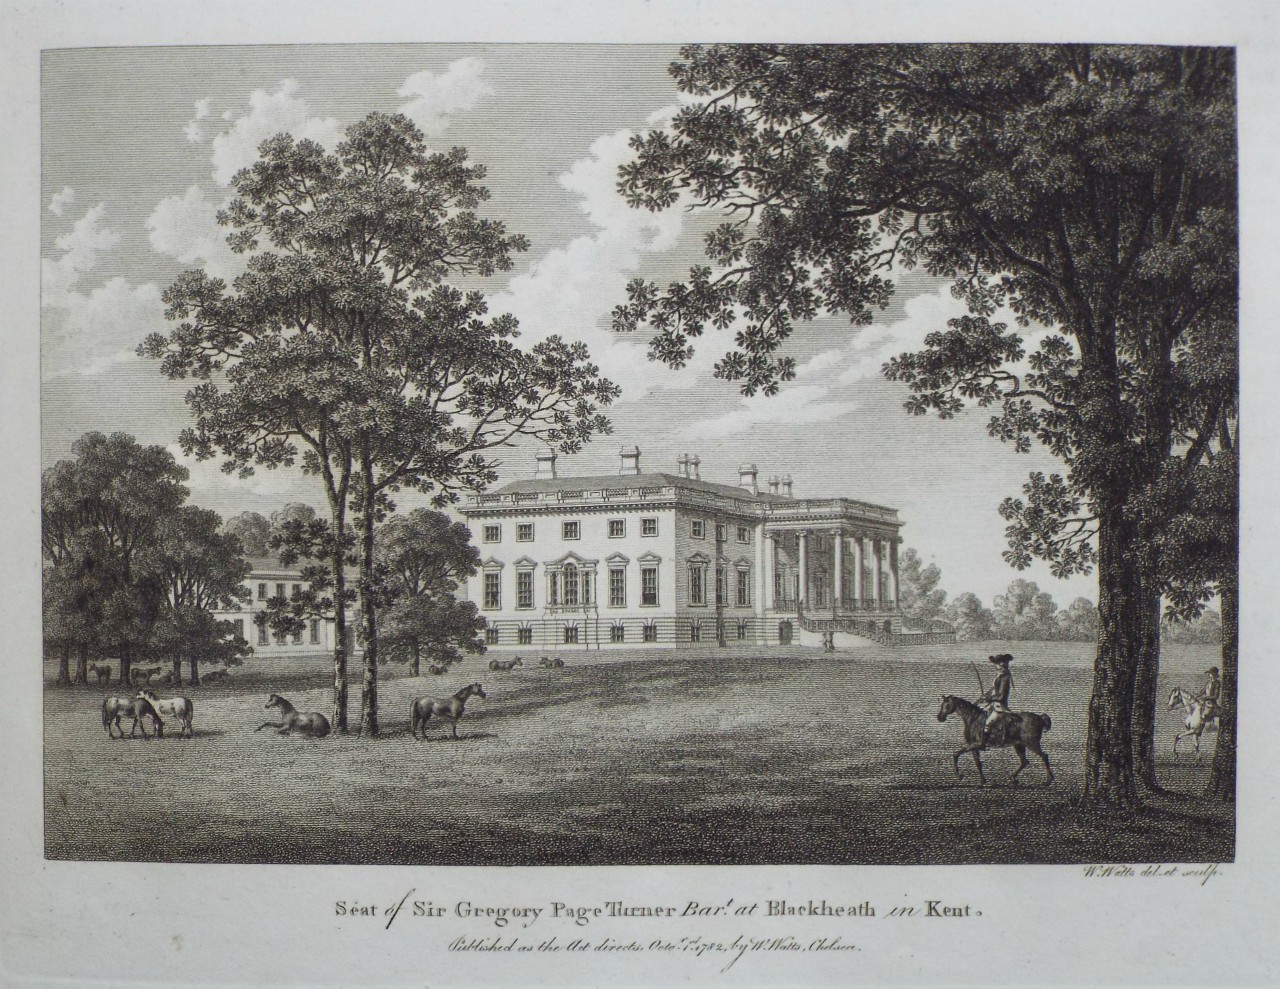 Print - Seat of Sir Gregory Page Turner Bart. at Blackheath in Kent. - Watts